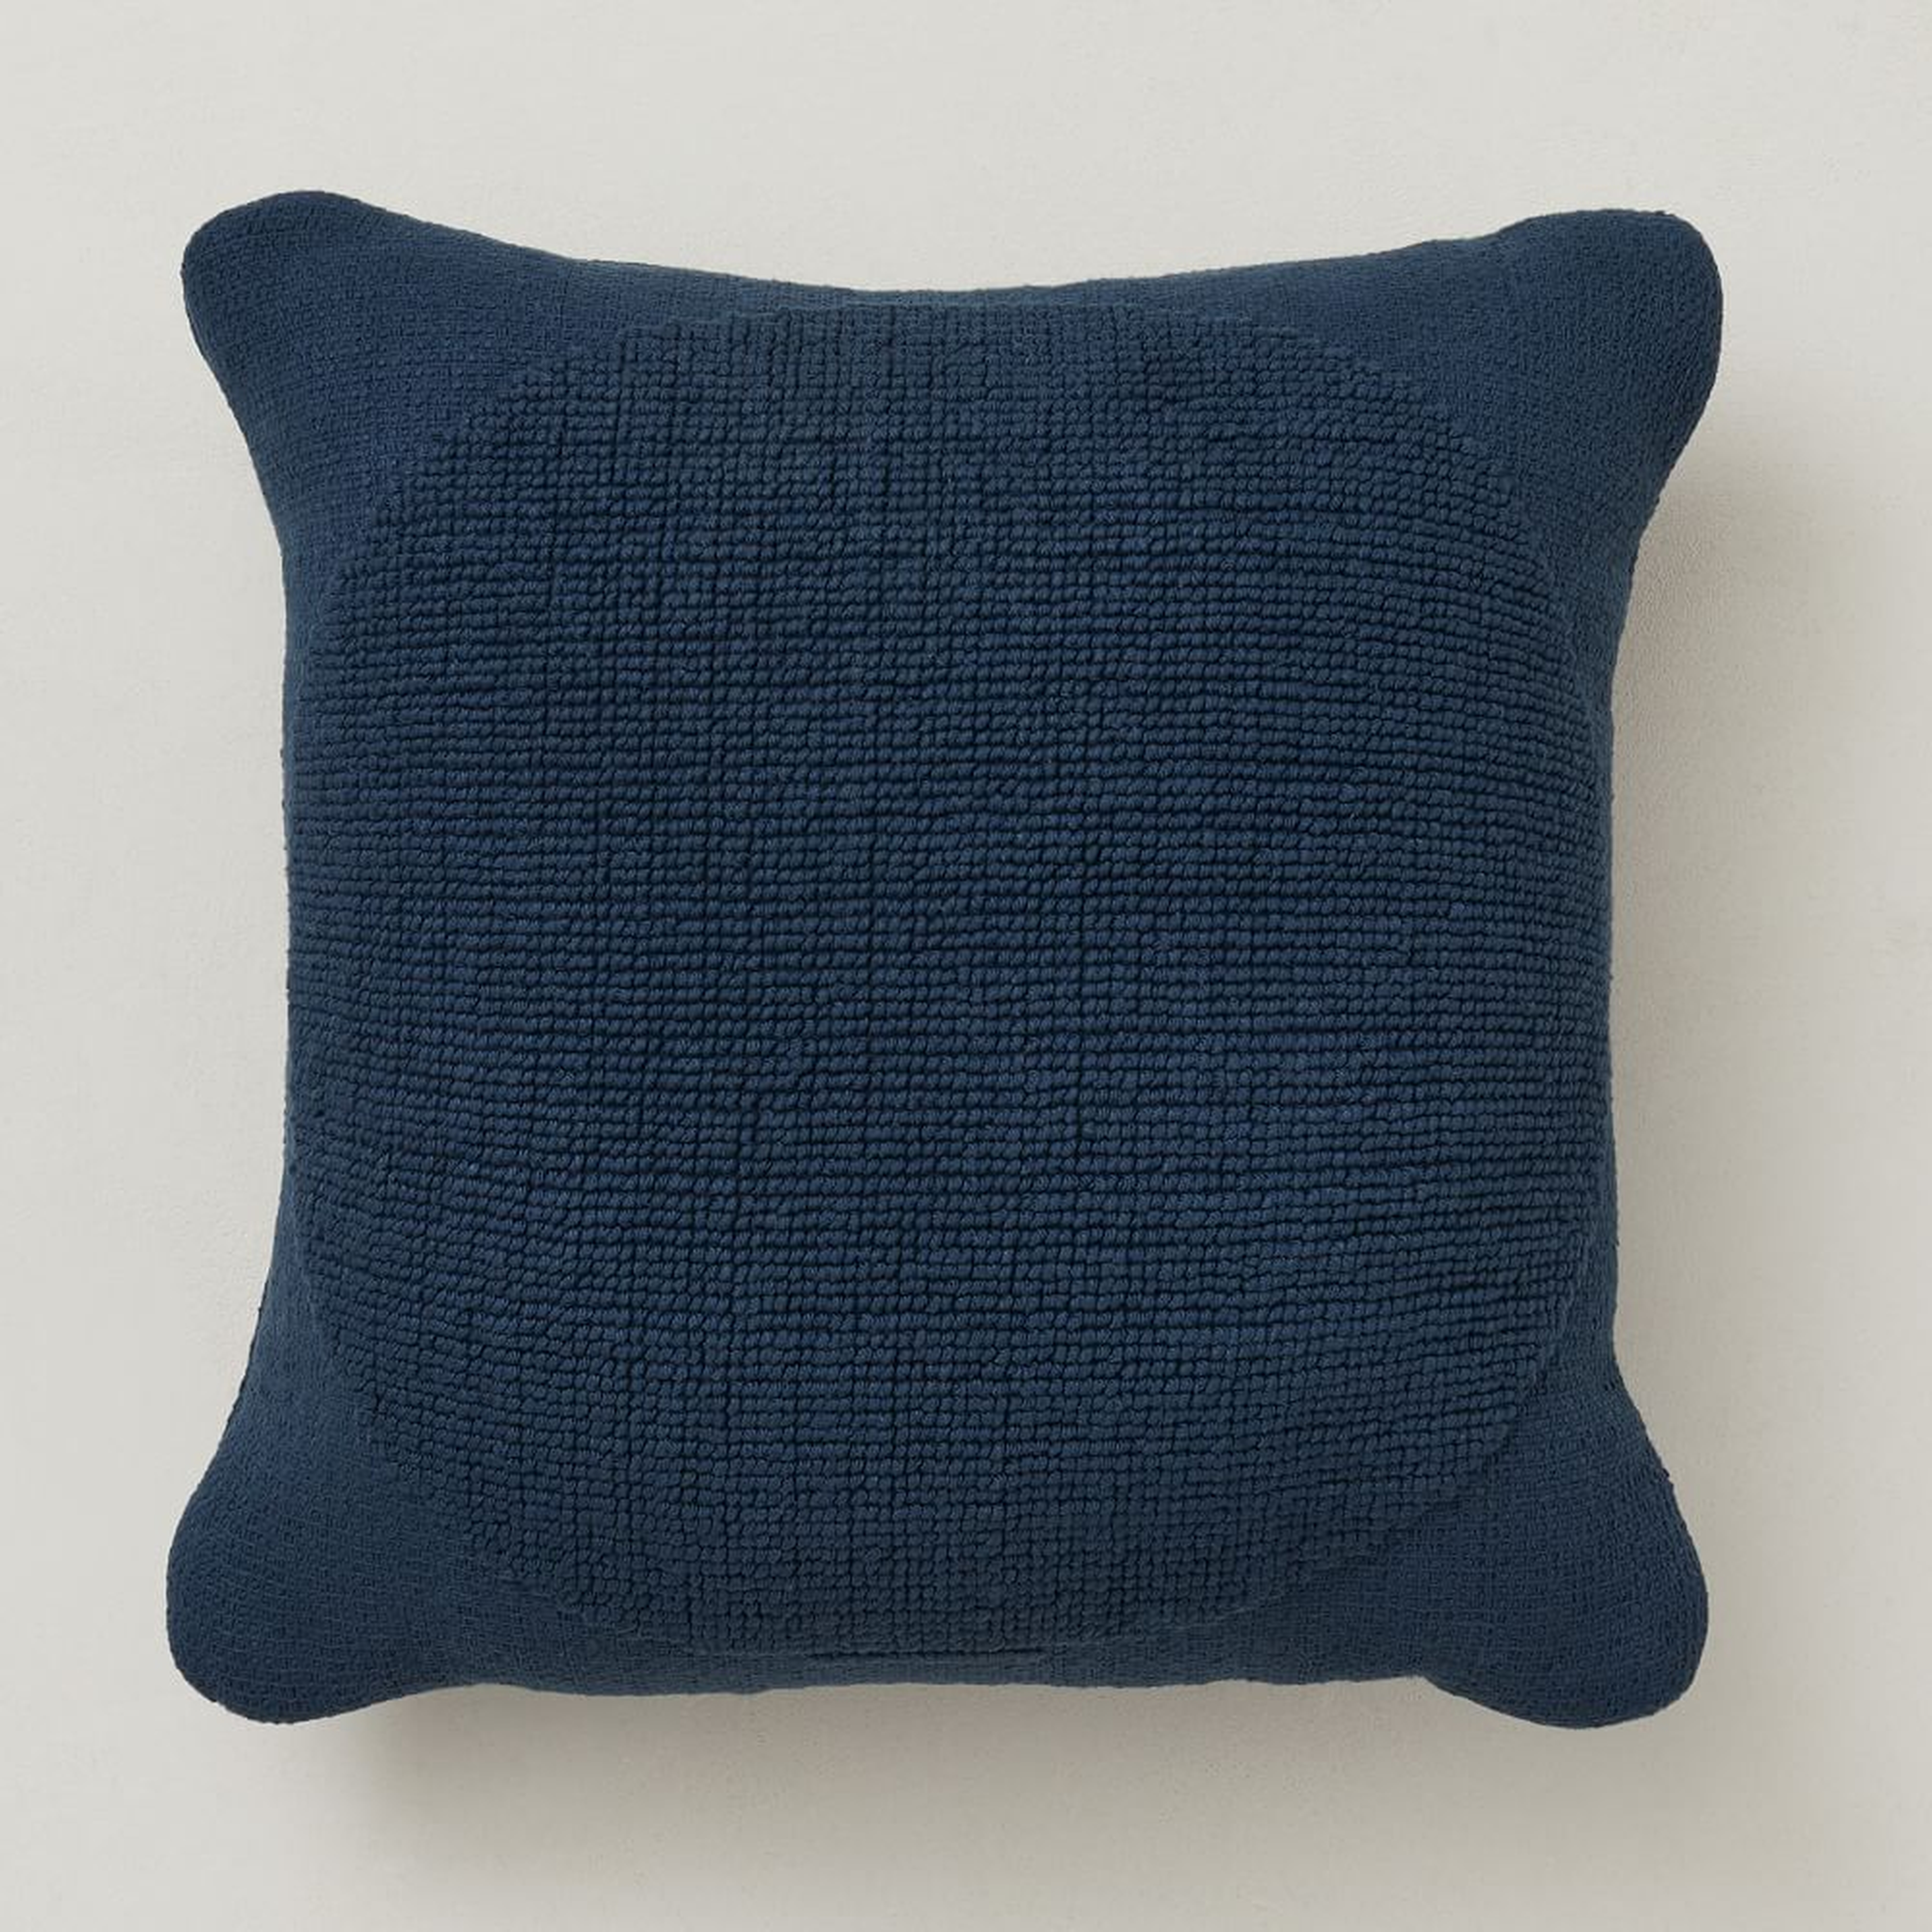 Outdoor Tufted Circle Pillow, 20"x20", Midnight, Set of 2 - West Elm